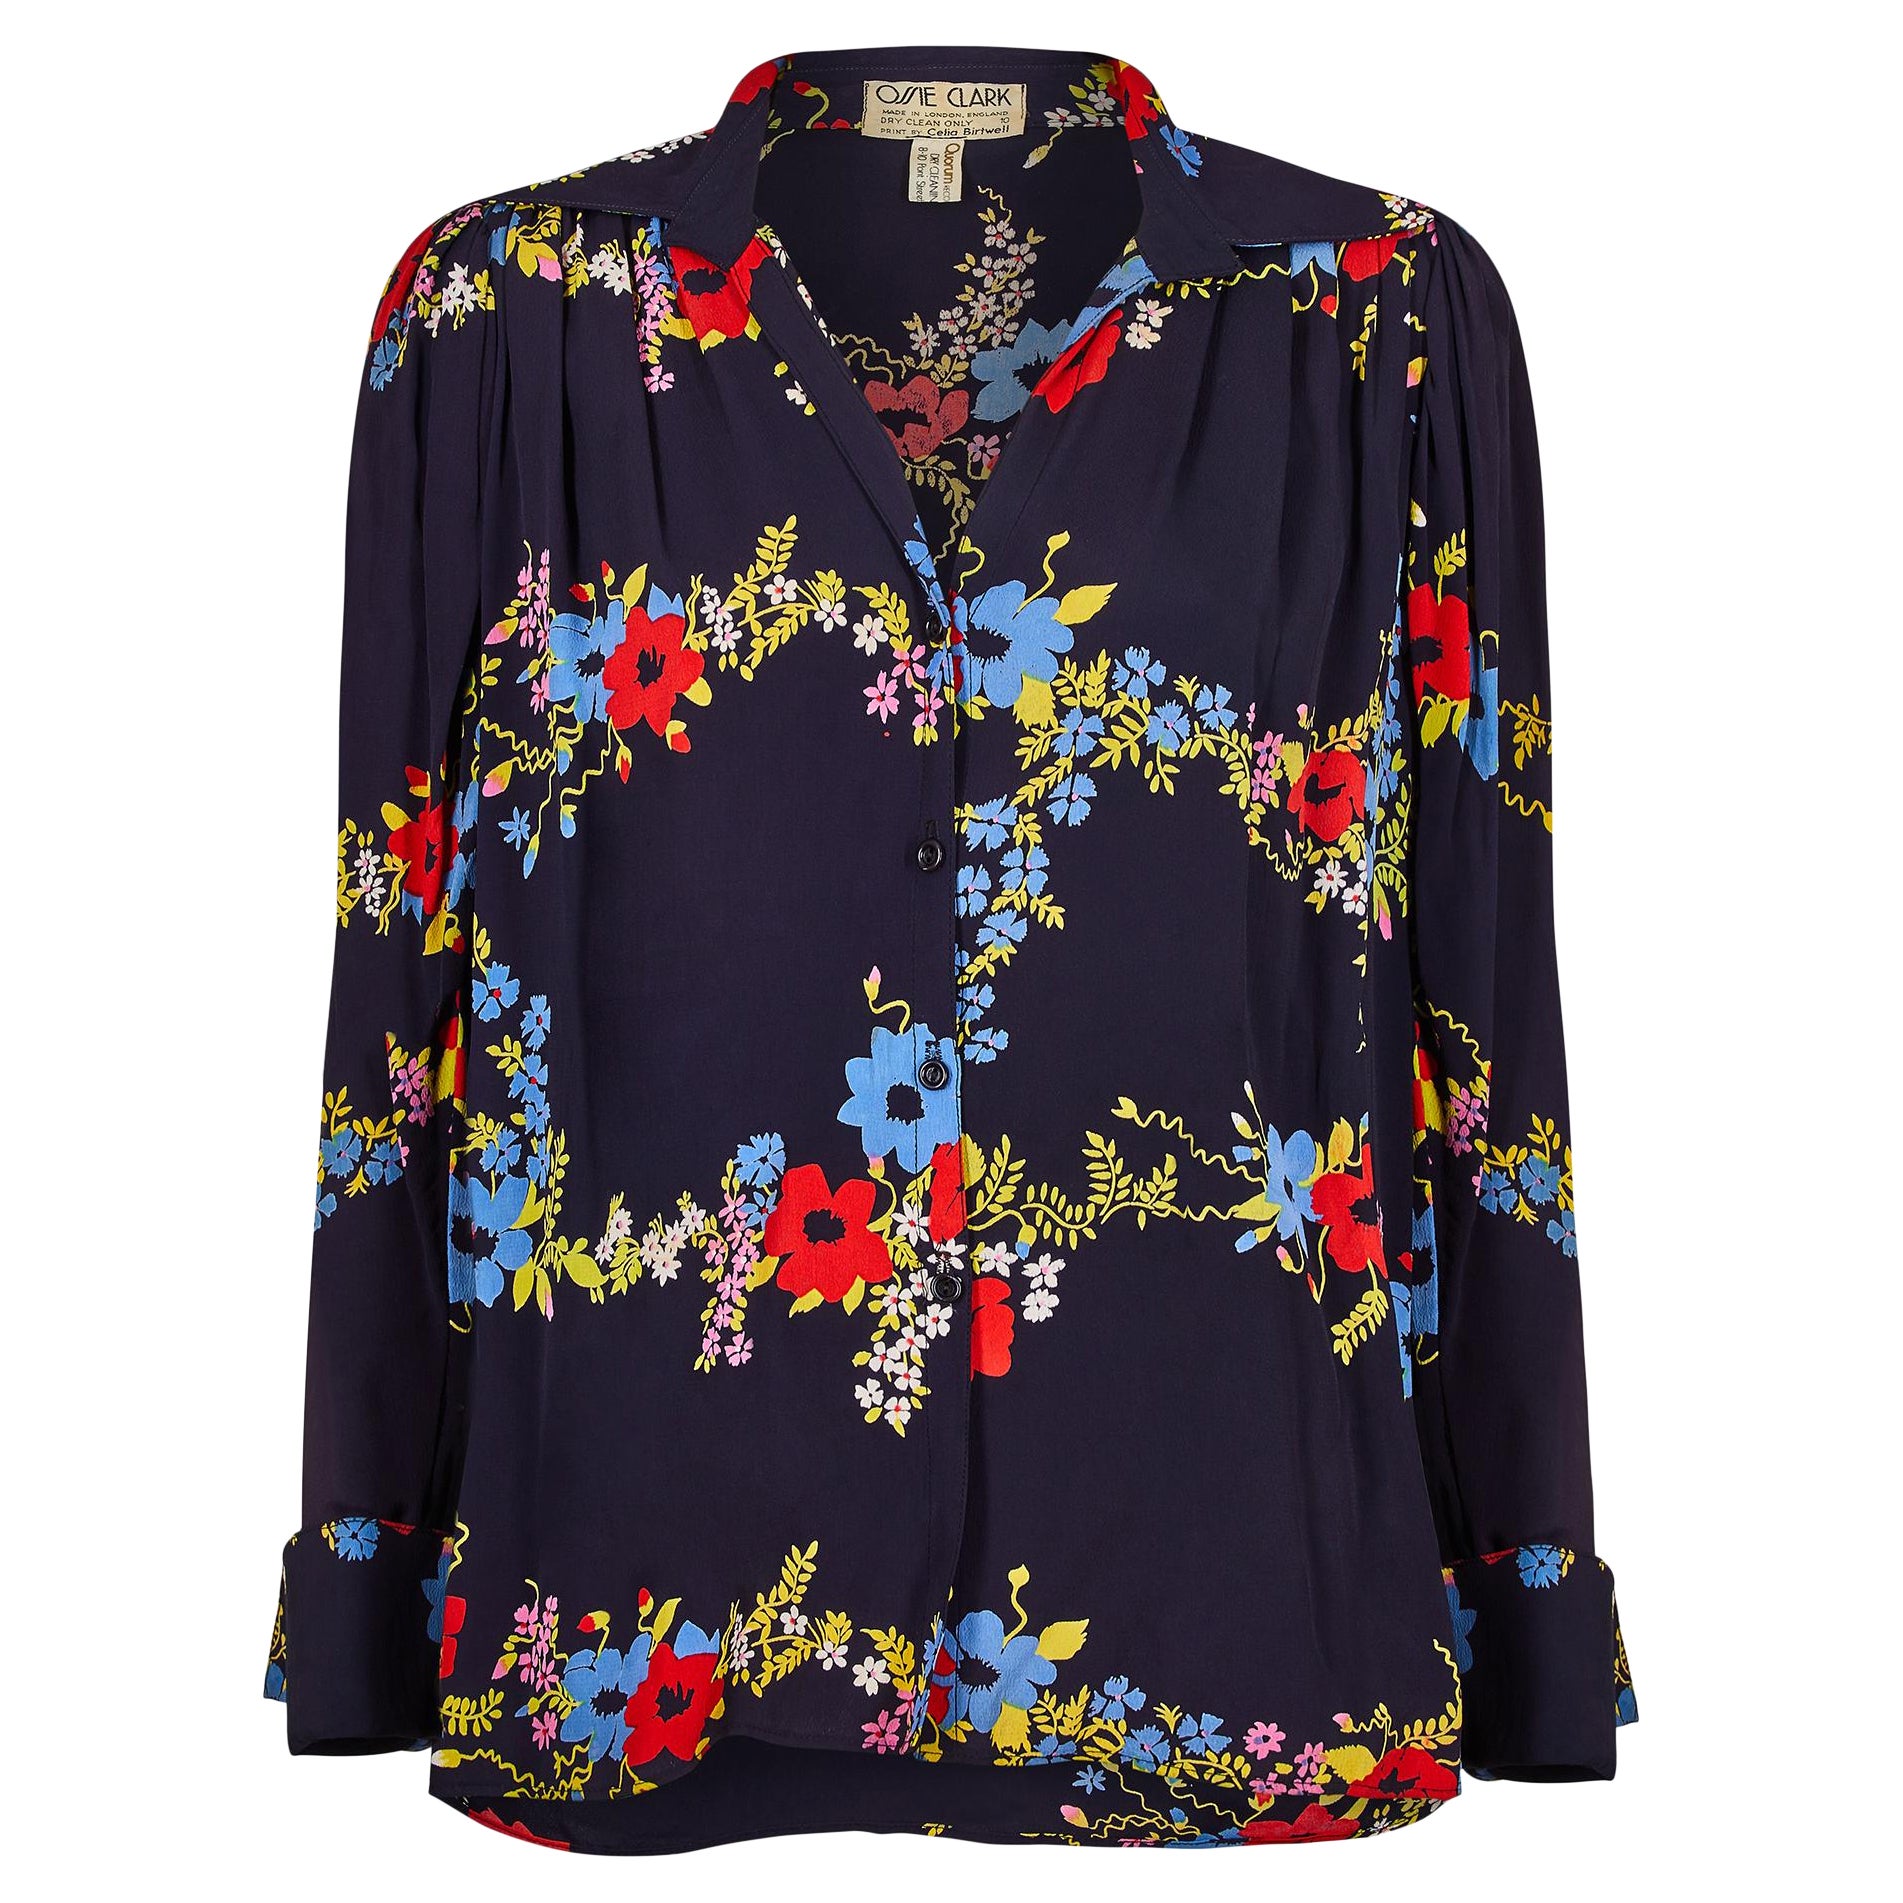 Ossie Clark voile blouse with Celia Birtwell print, circa 1972 For Sale ...